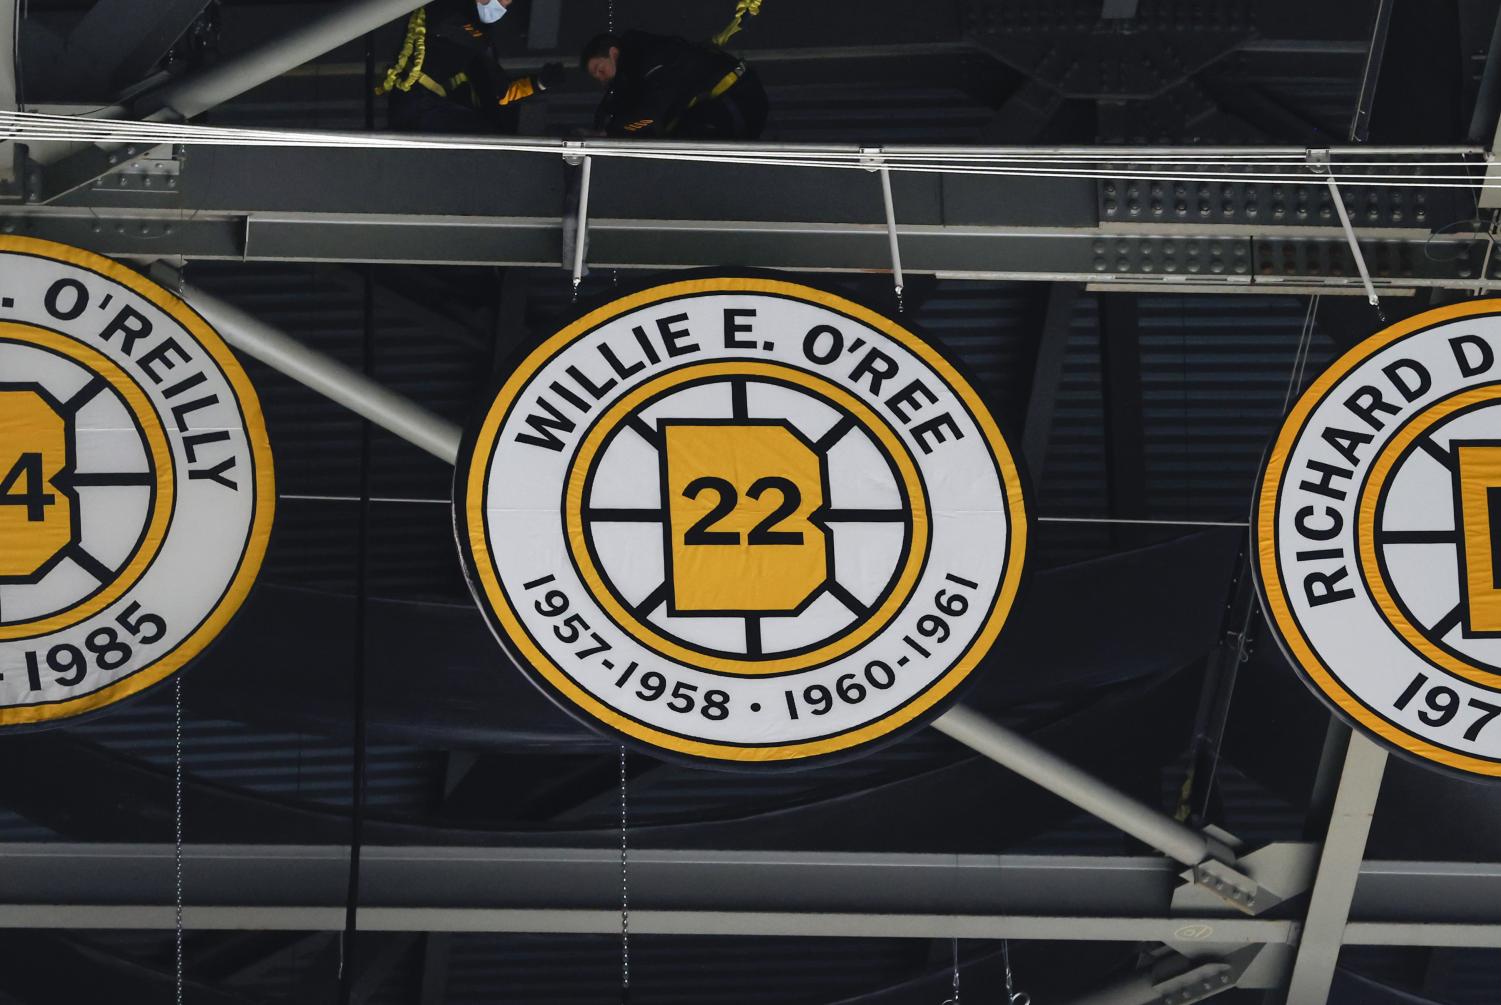 Bruins retiring number of Willie O'Ree, NHL's first Black player